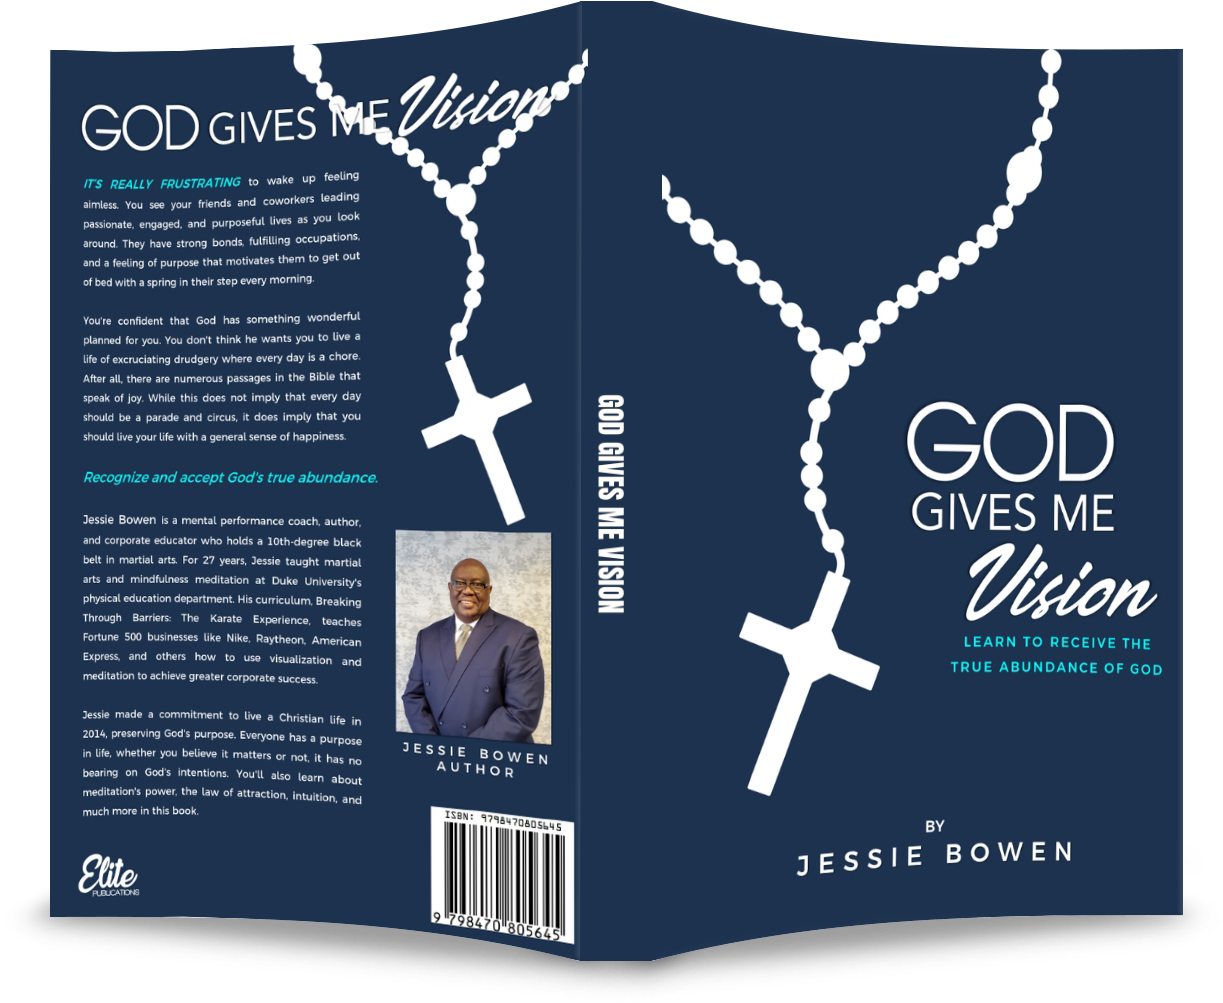 God Gave Me Vision - Learn to Receive the True Abundance of God